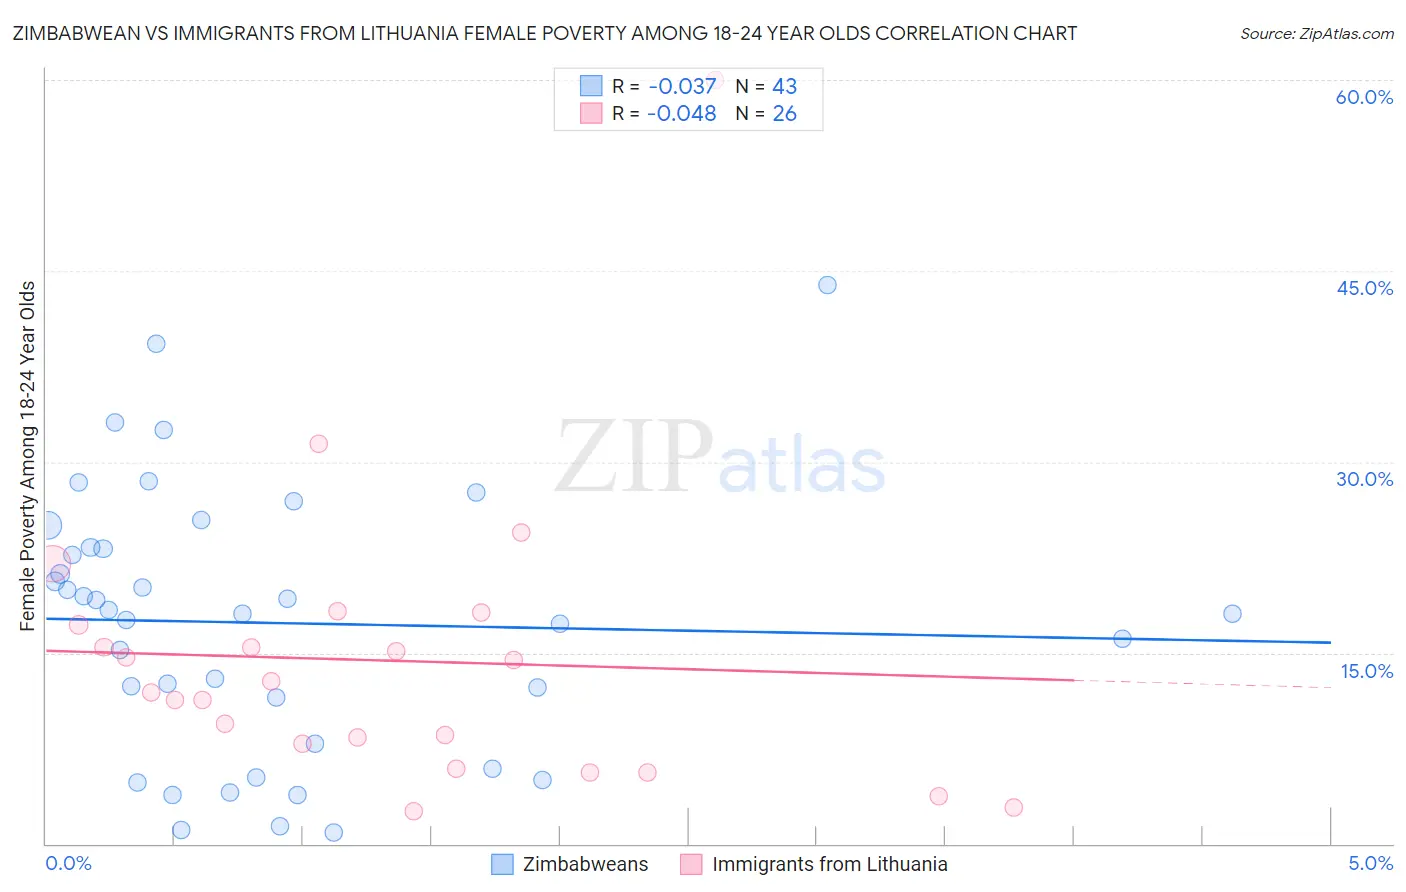 Zimbabwean vs Immigrants from Lithuania Female Poverty Among 18-24 Year Olds